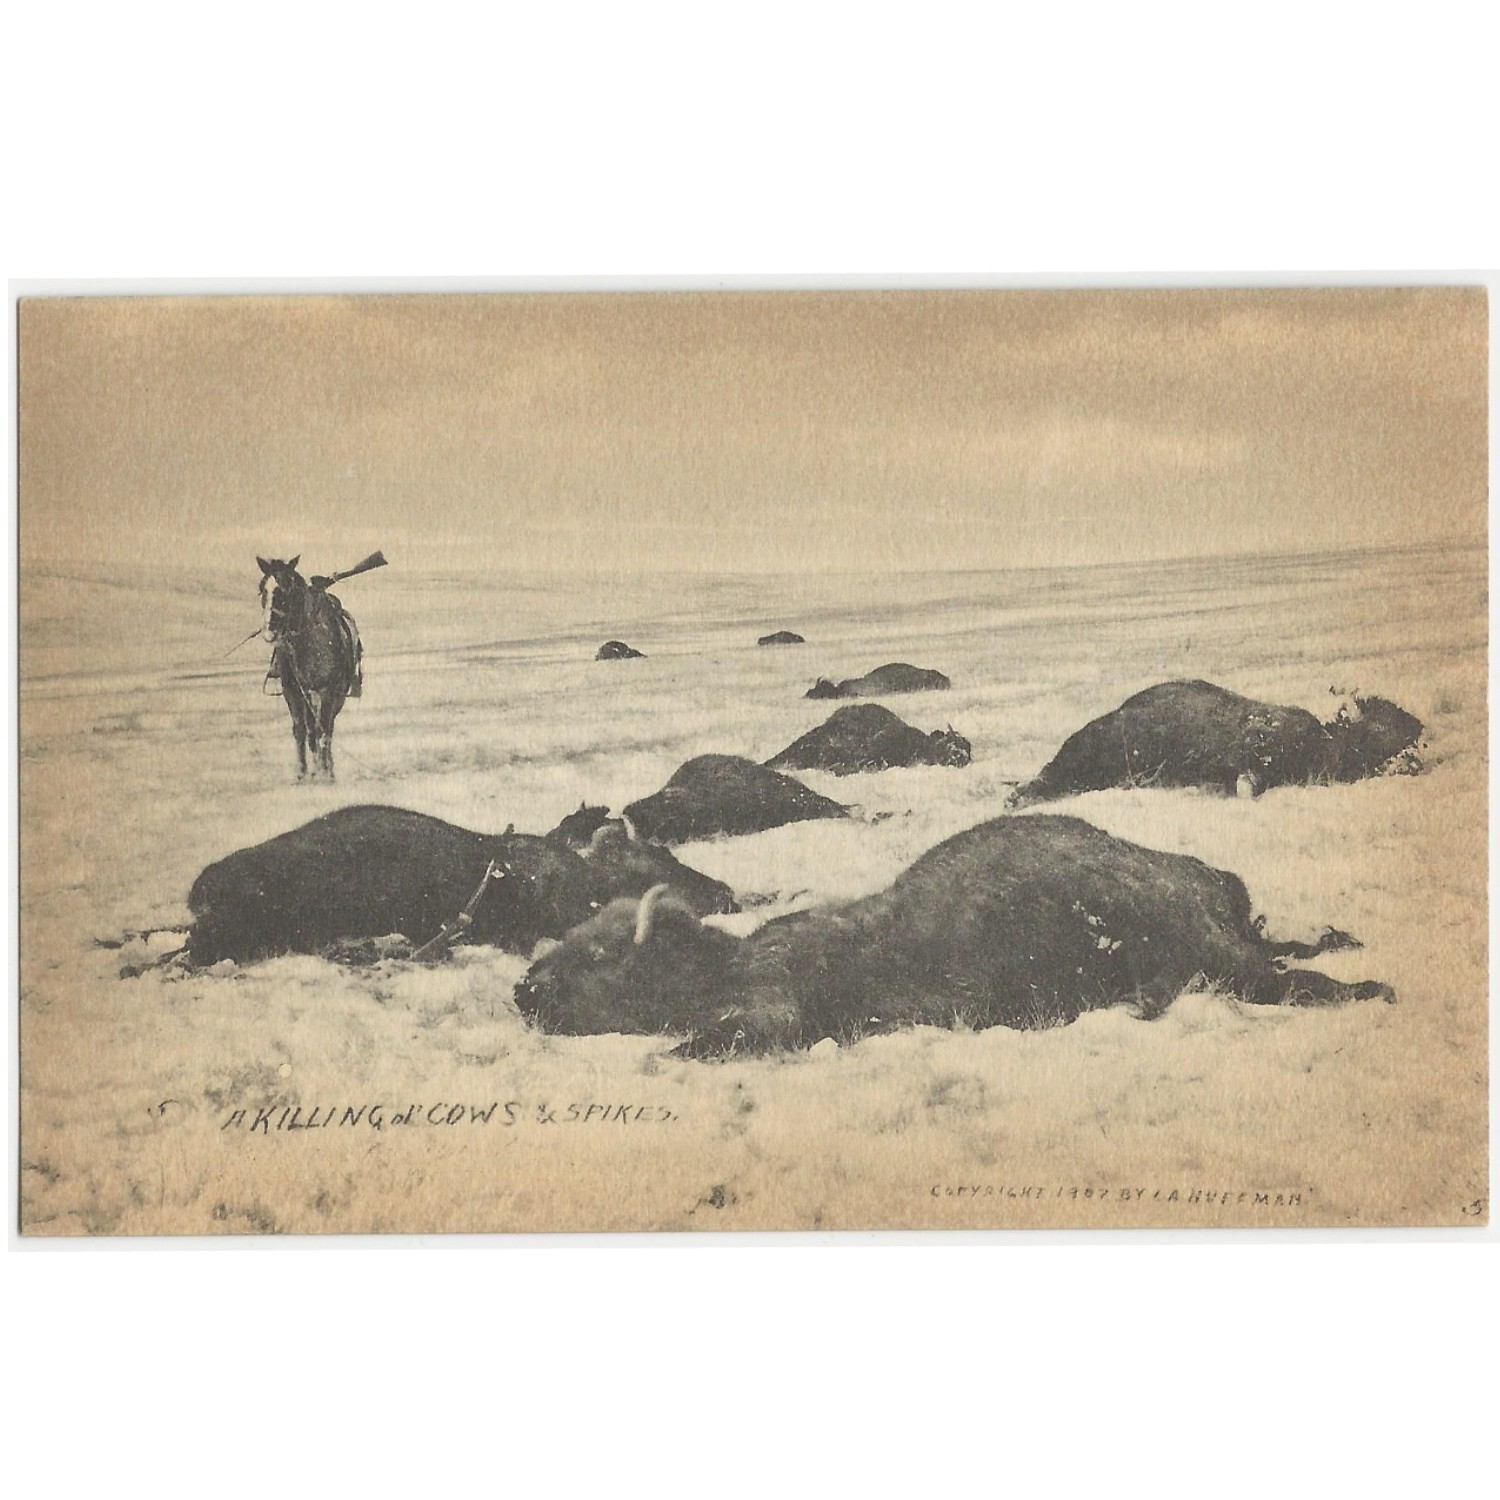 Postcard of the killing of cows & spikes by L.A. Huffman